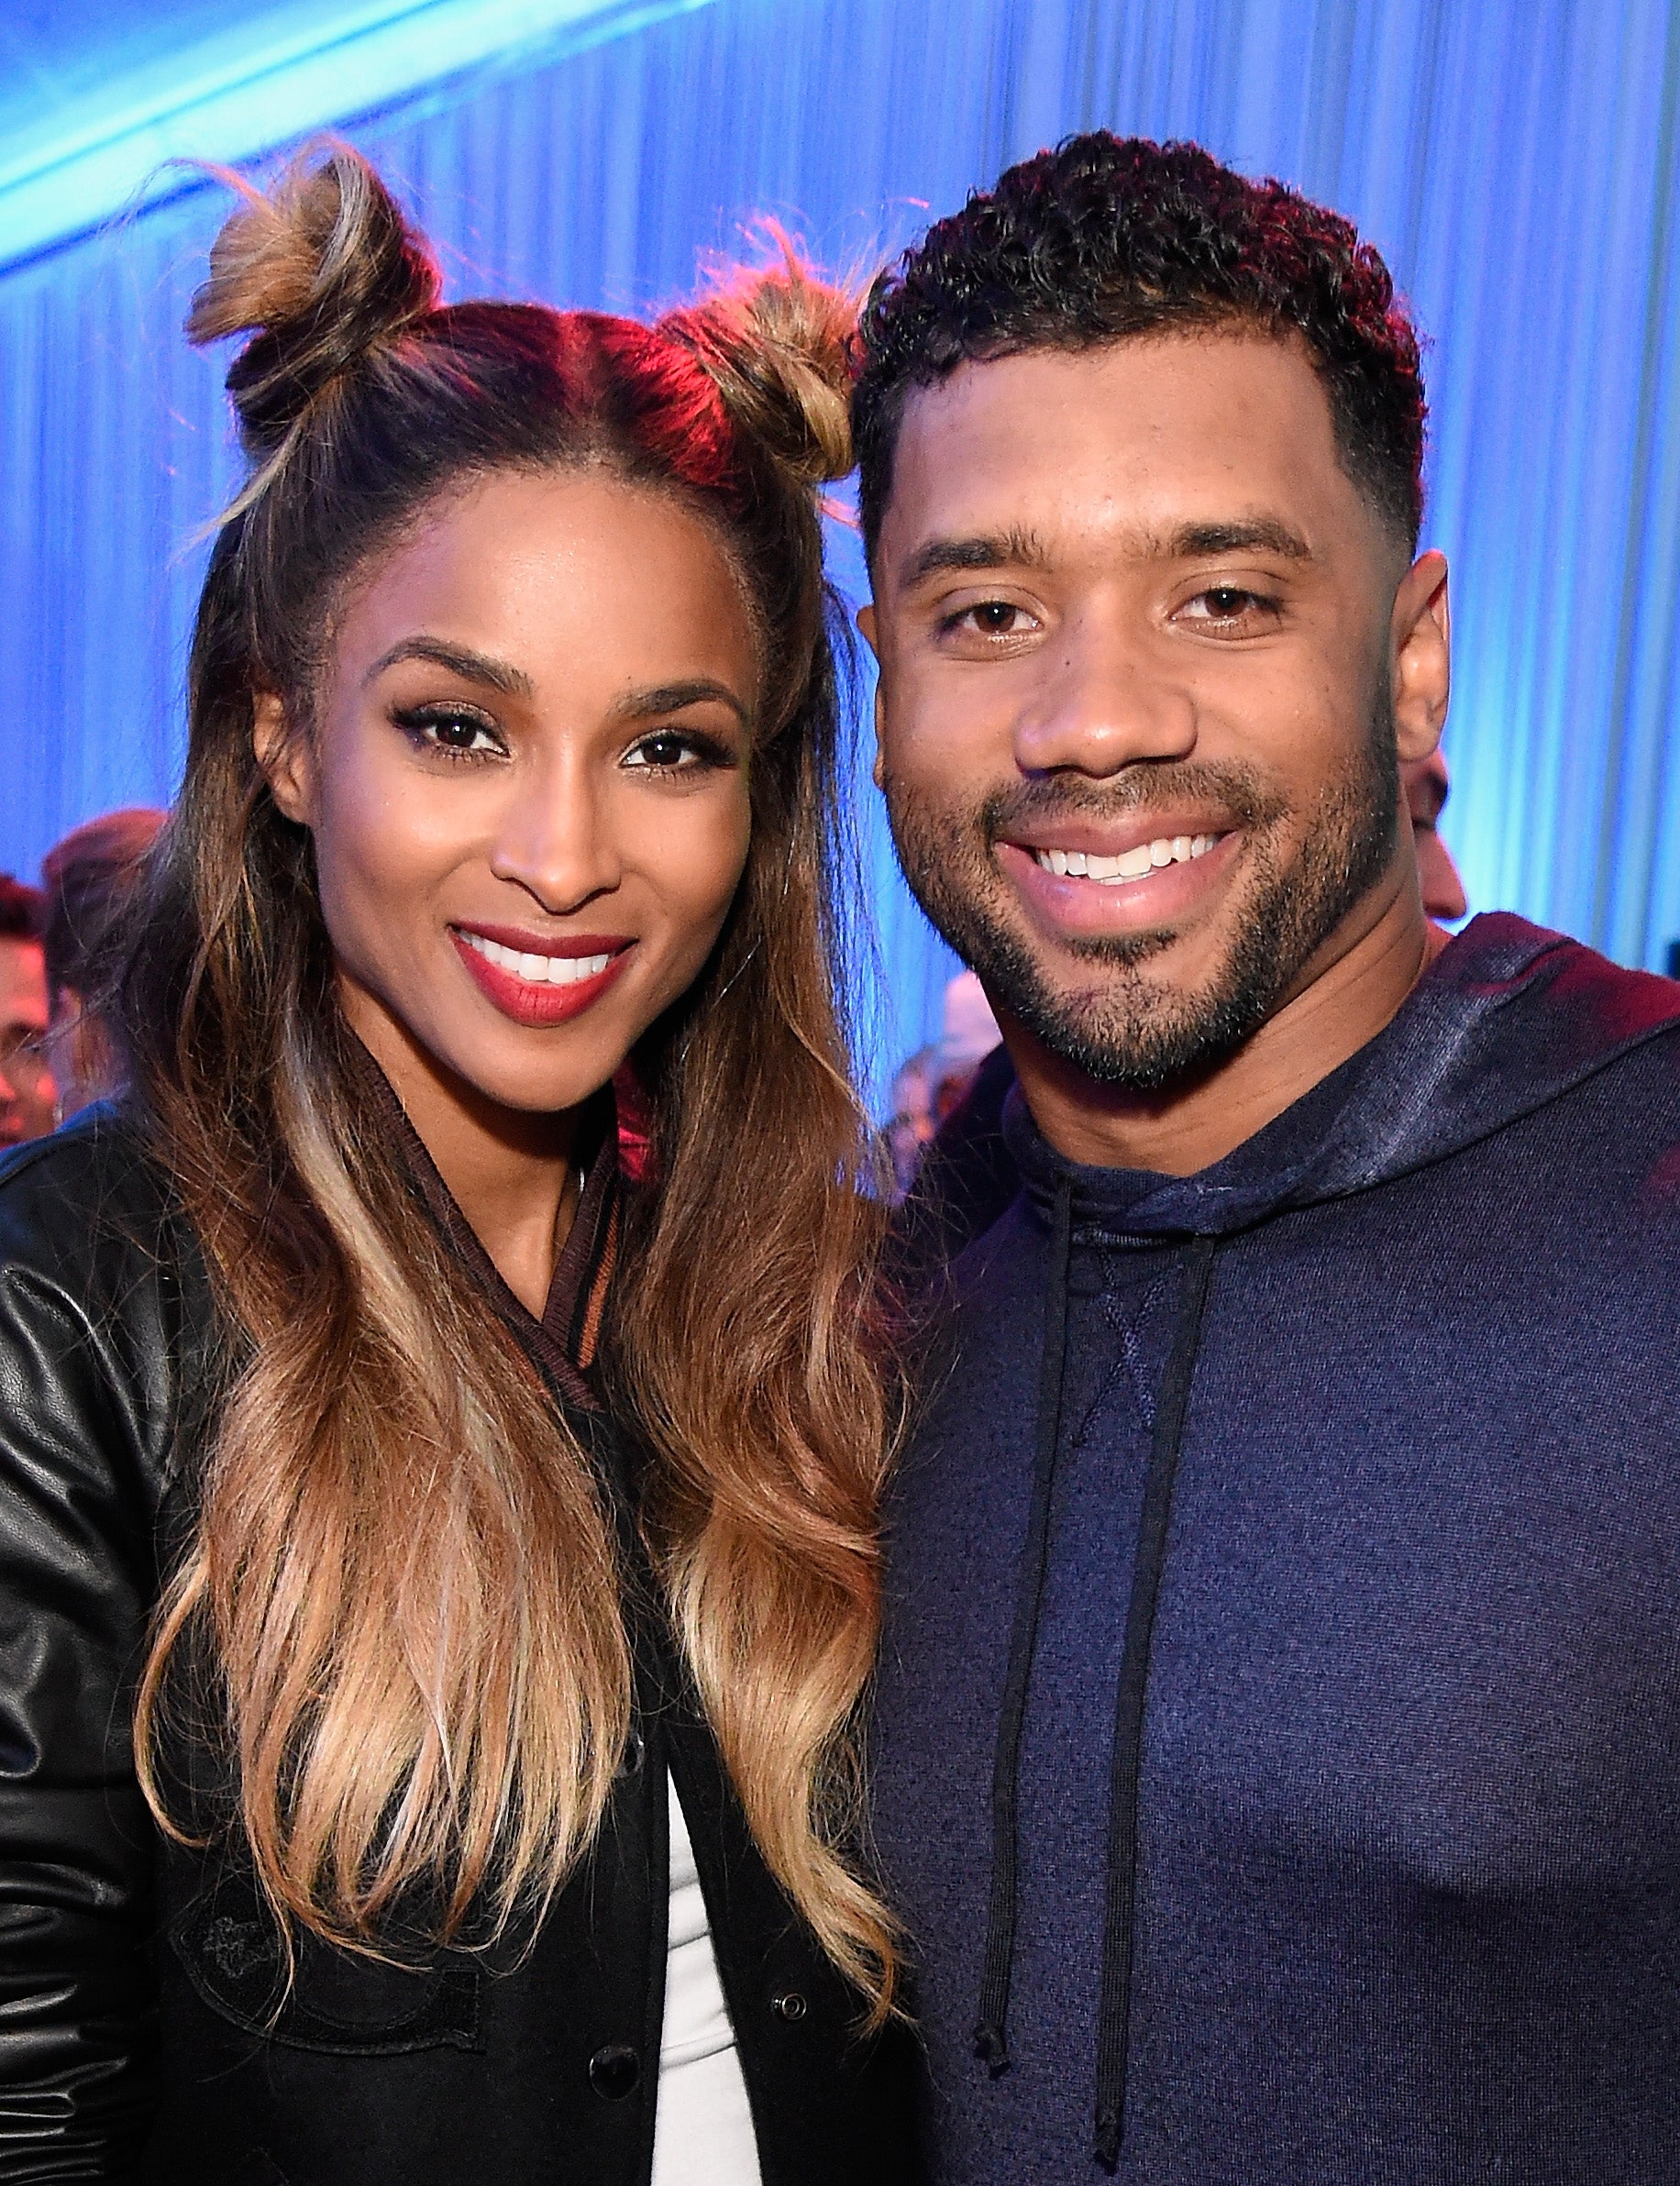 Russell Wilson Says He And Ciara Have Decided On A Name For Their Baby: ‘We Both Have Some Creative Sense’